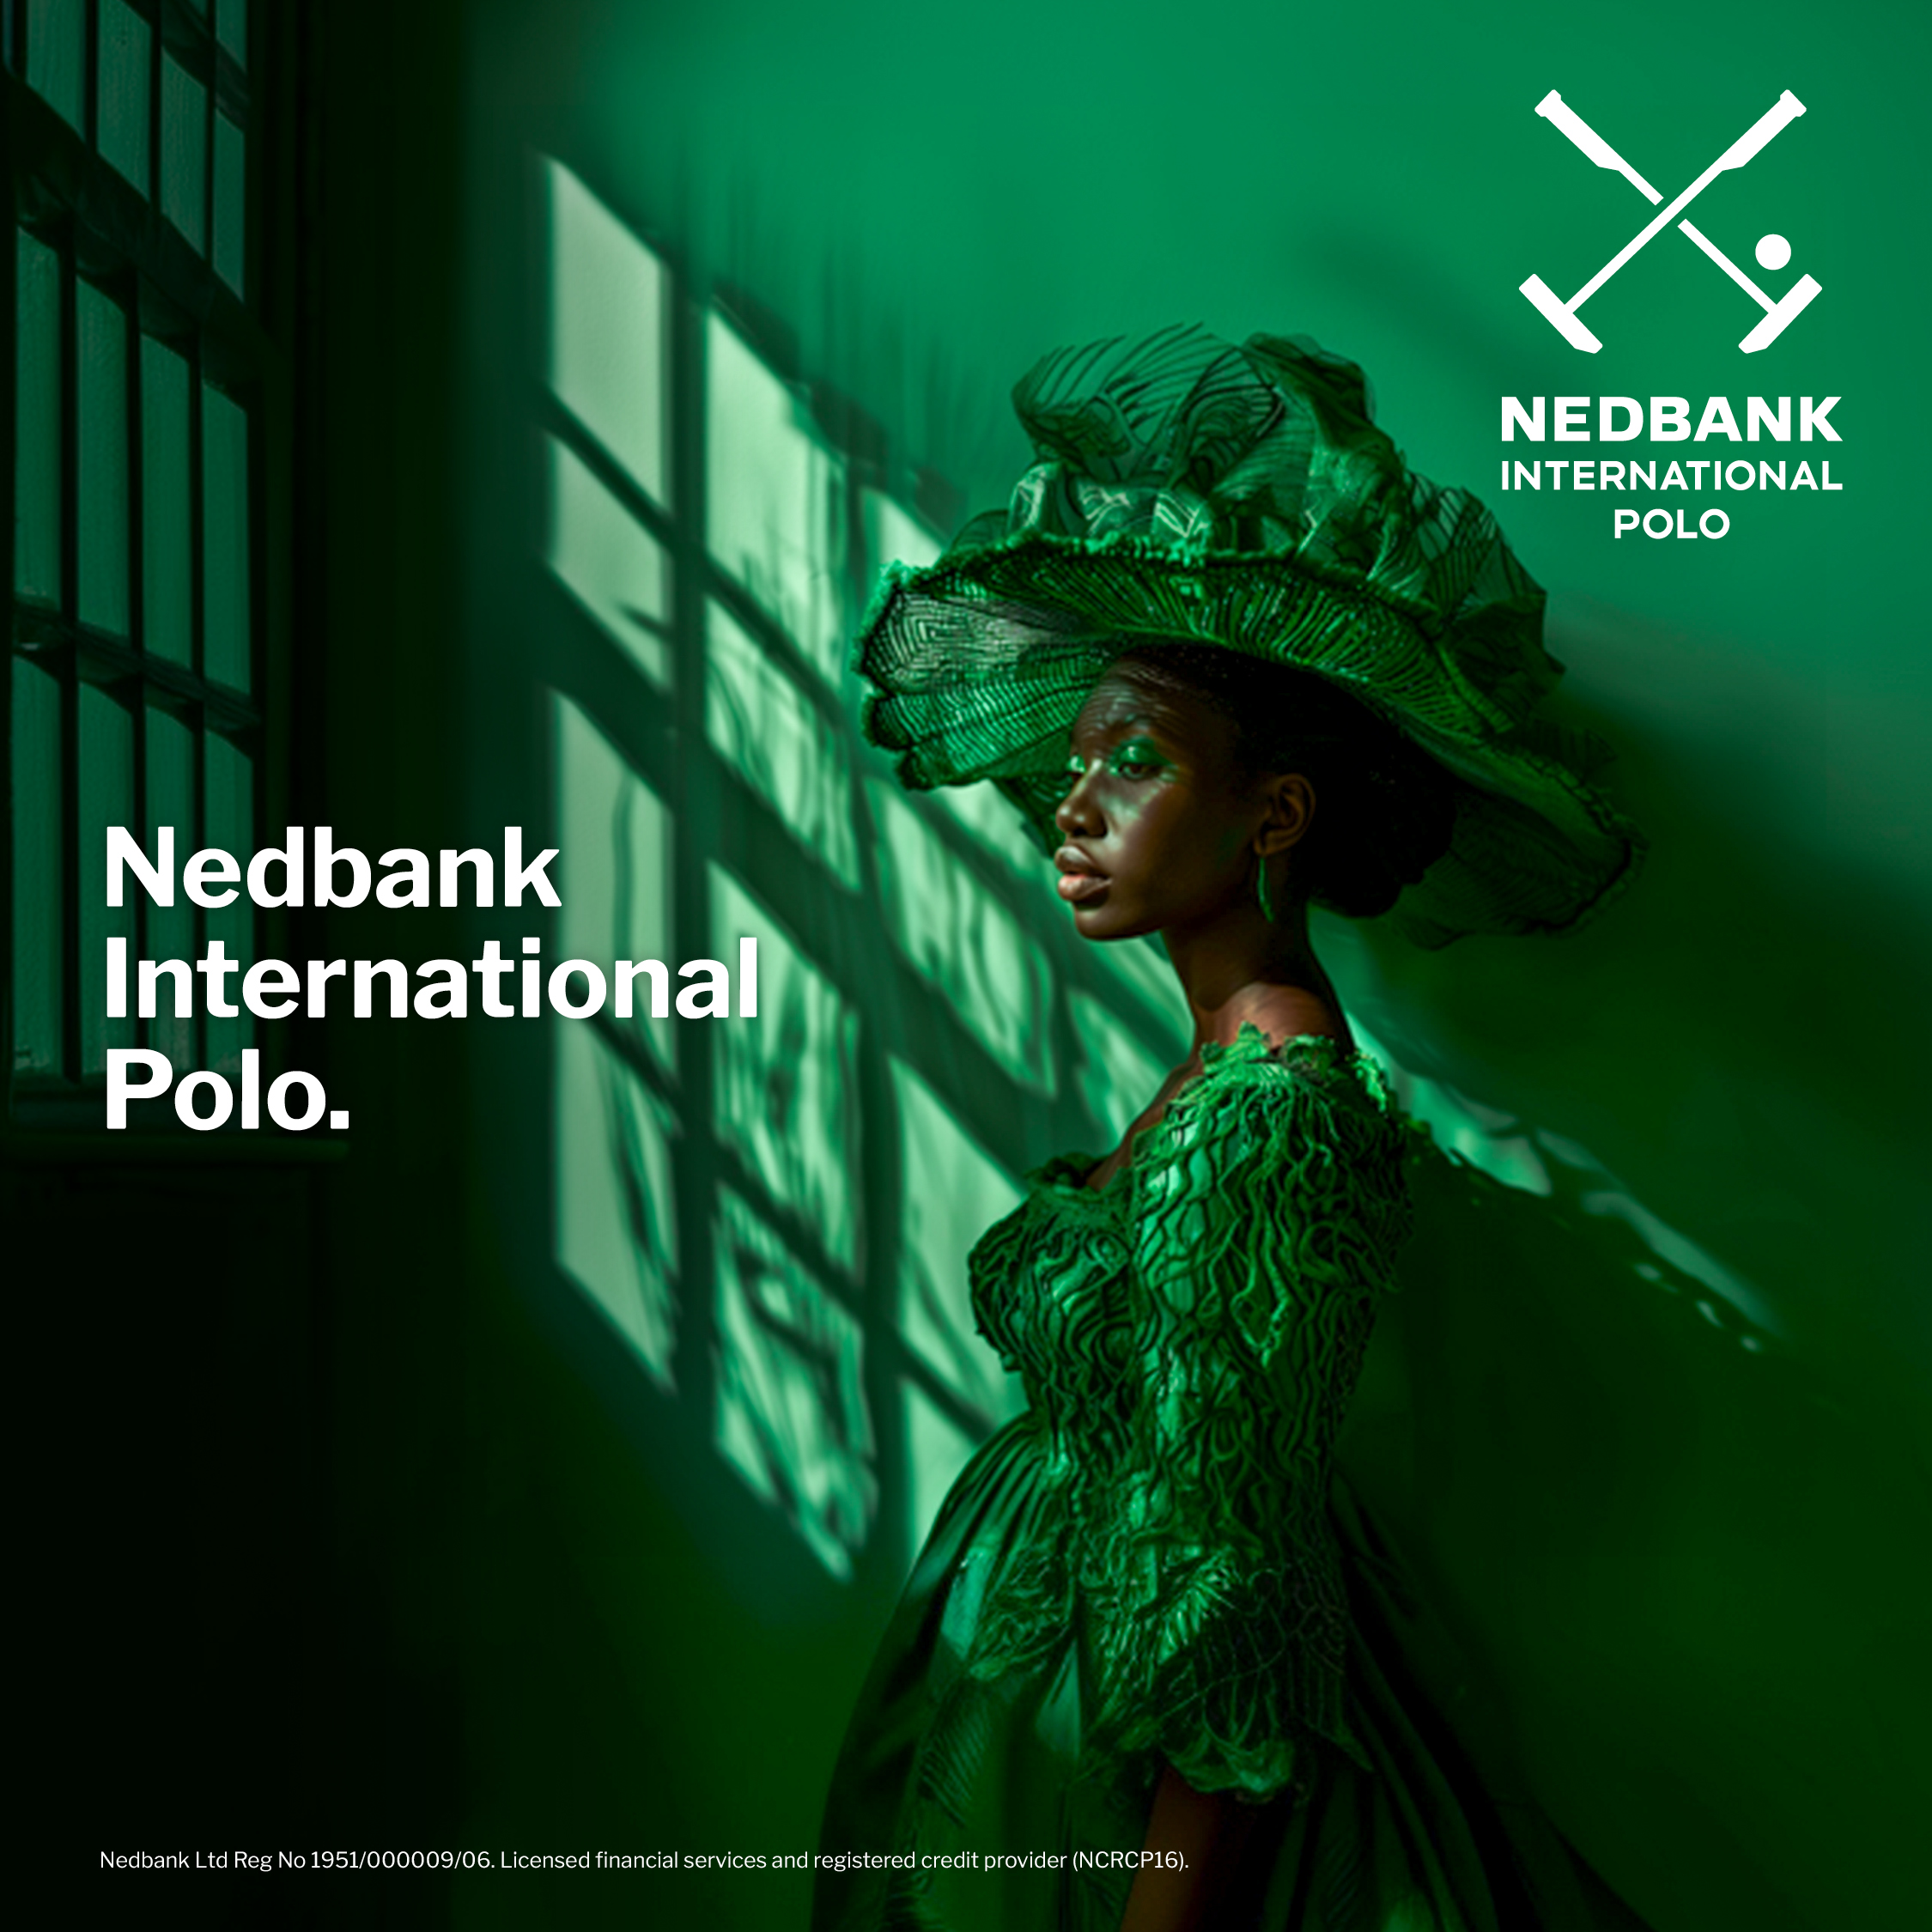 You’re invited as Nedbank International Polo returns to Inanda Club